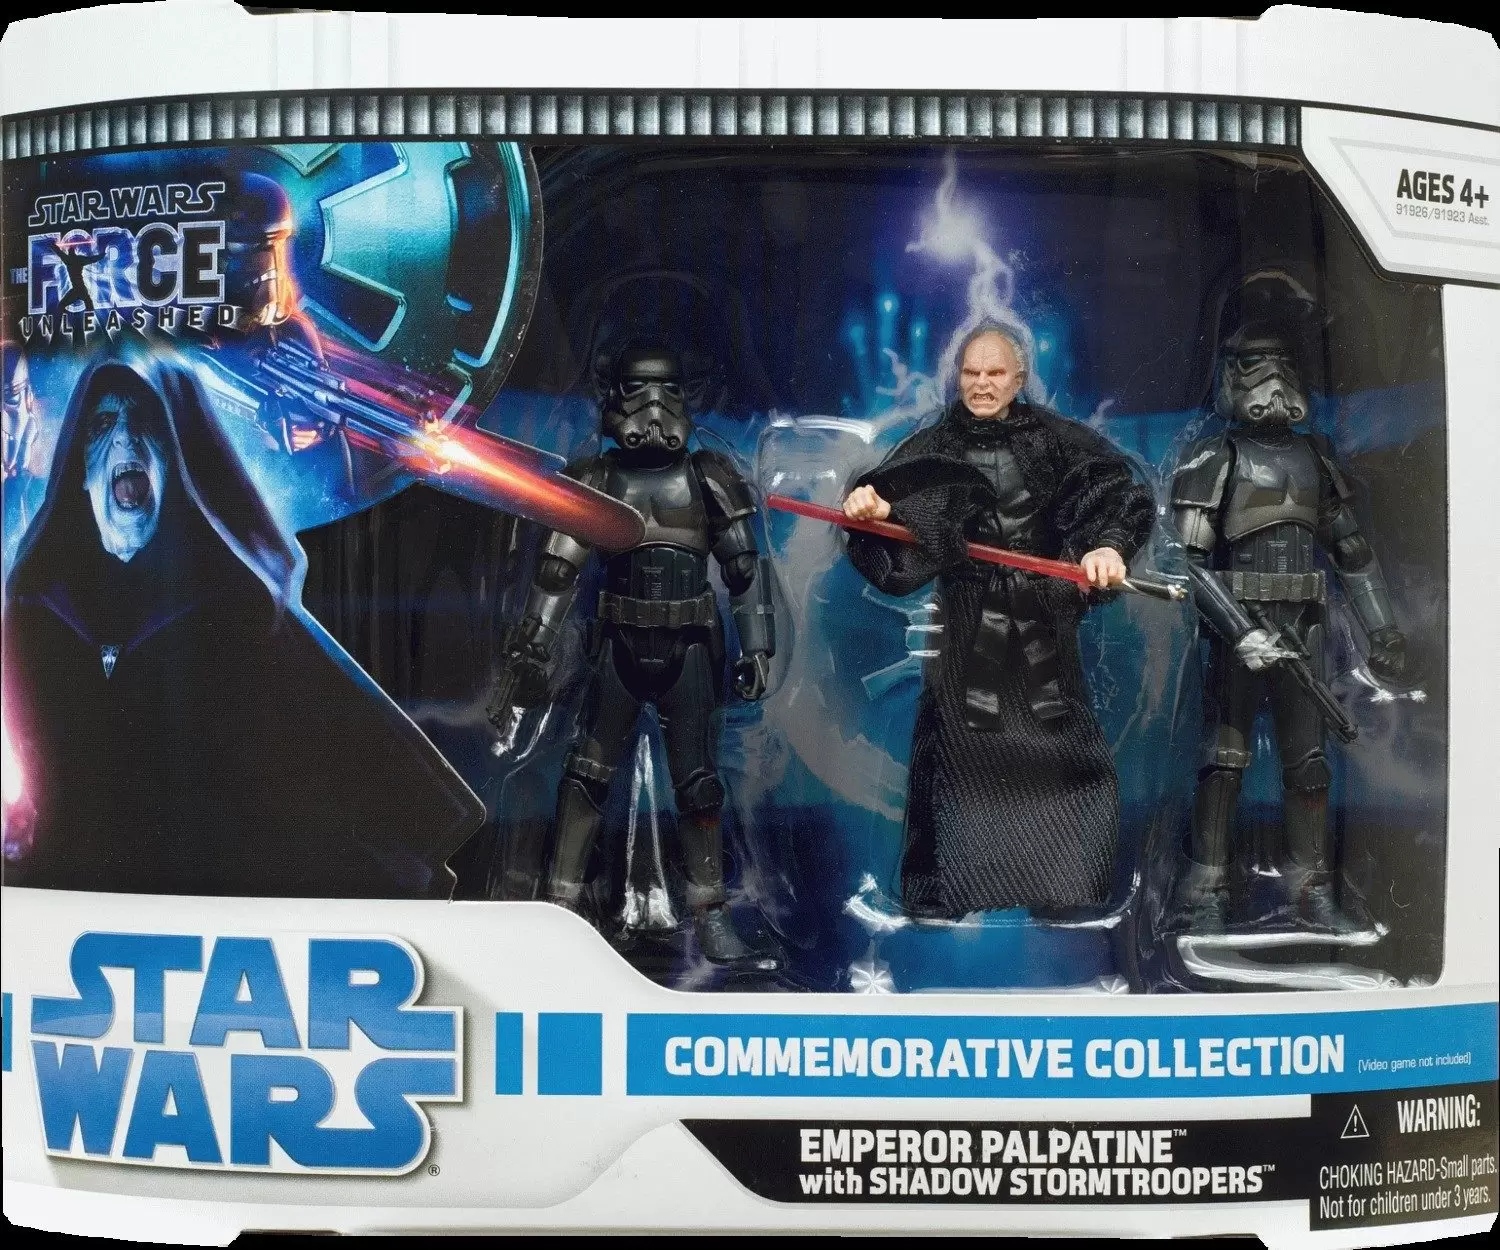 The Legacy Collection (TLC Bleu) - Emperor Palpatine & Shadow Stormtroopers